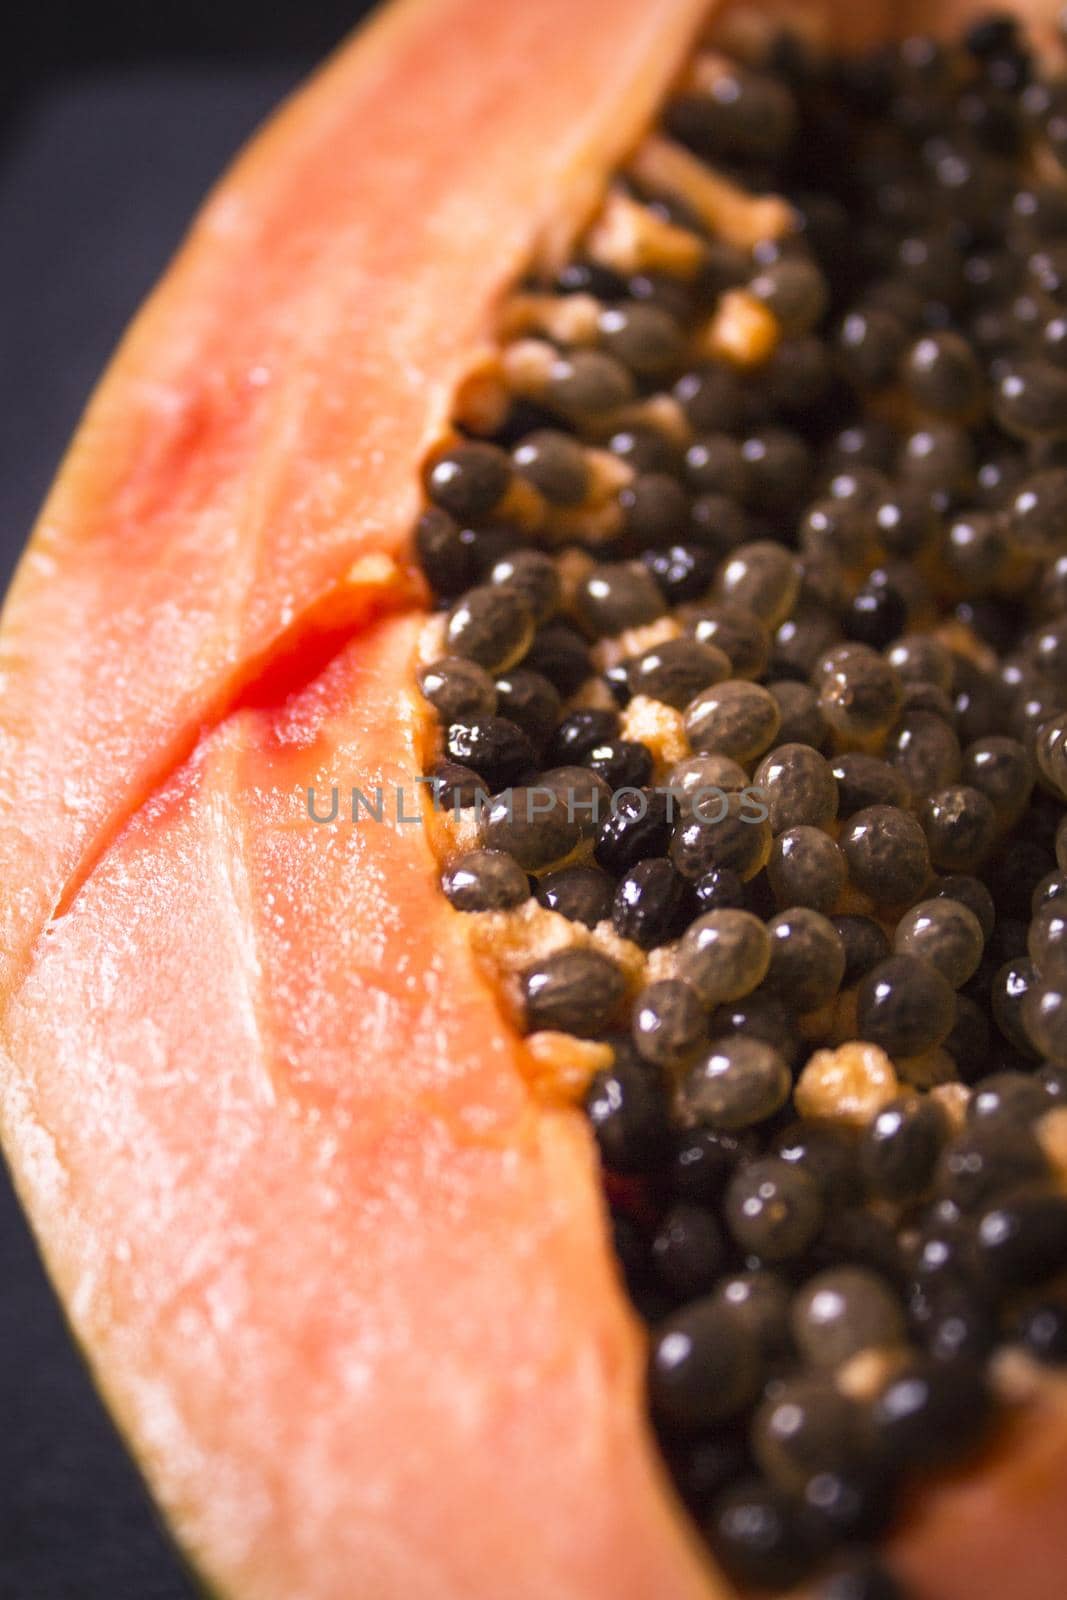 Half of an open papaya with the seeds. No people